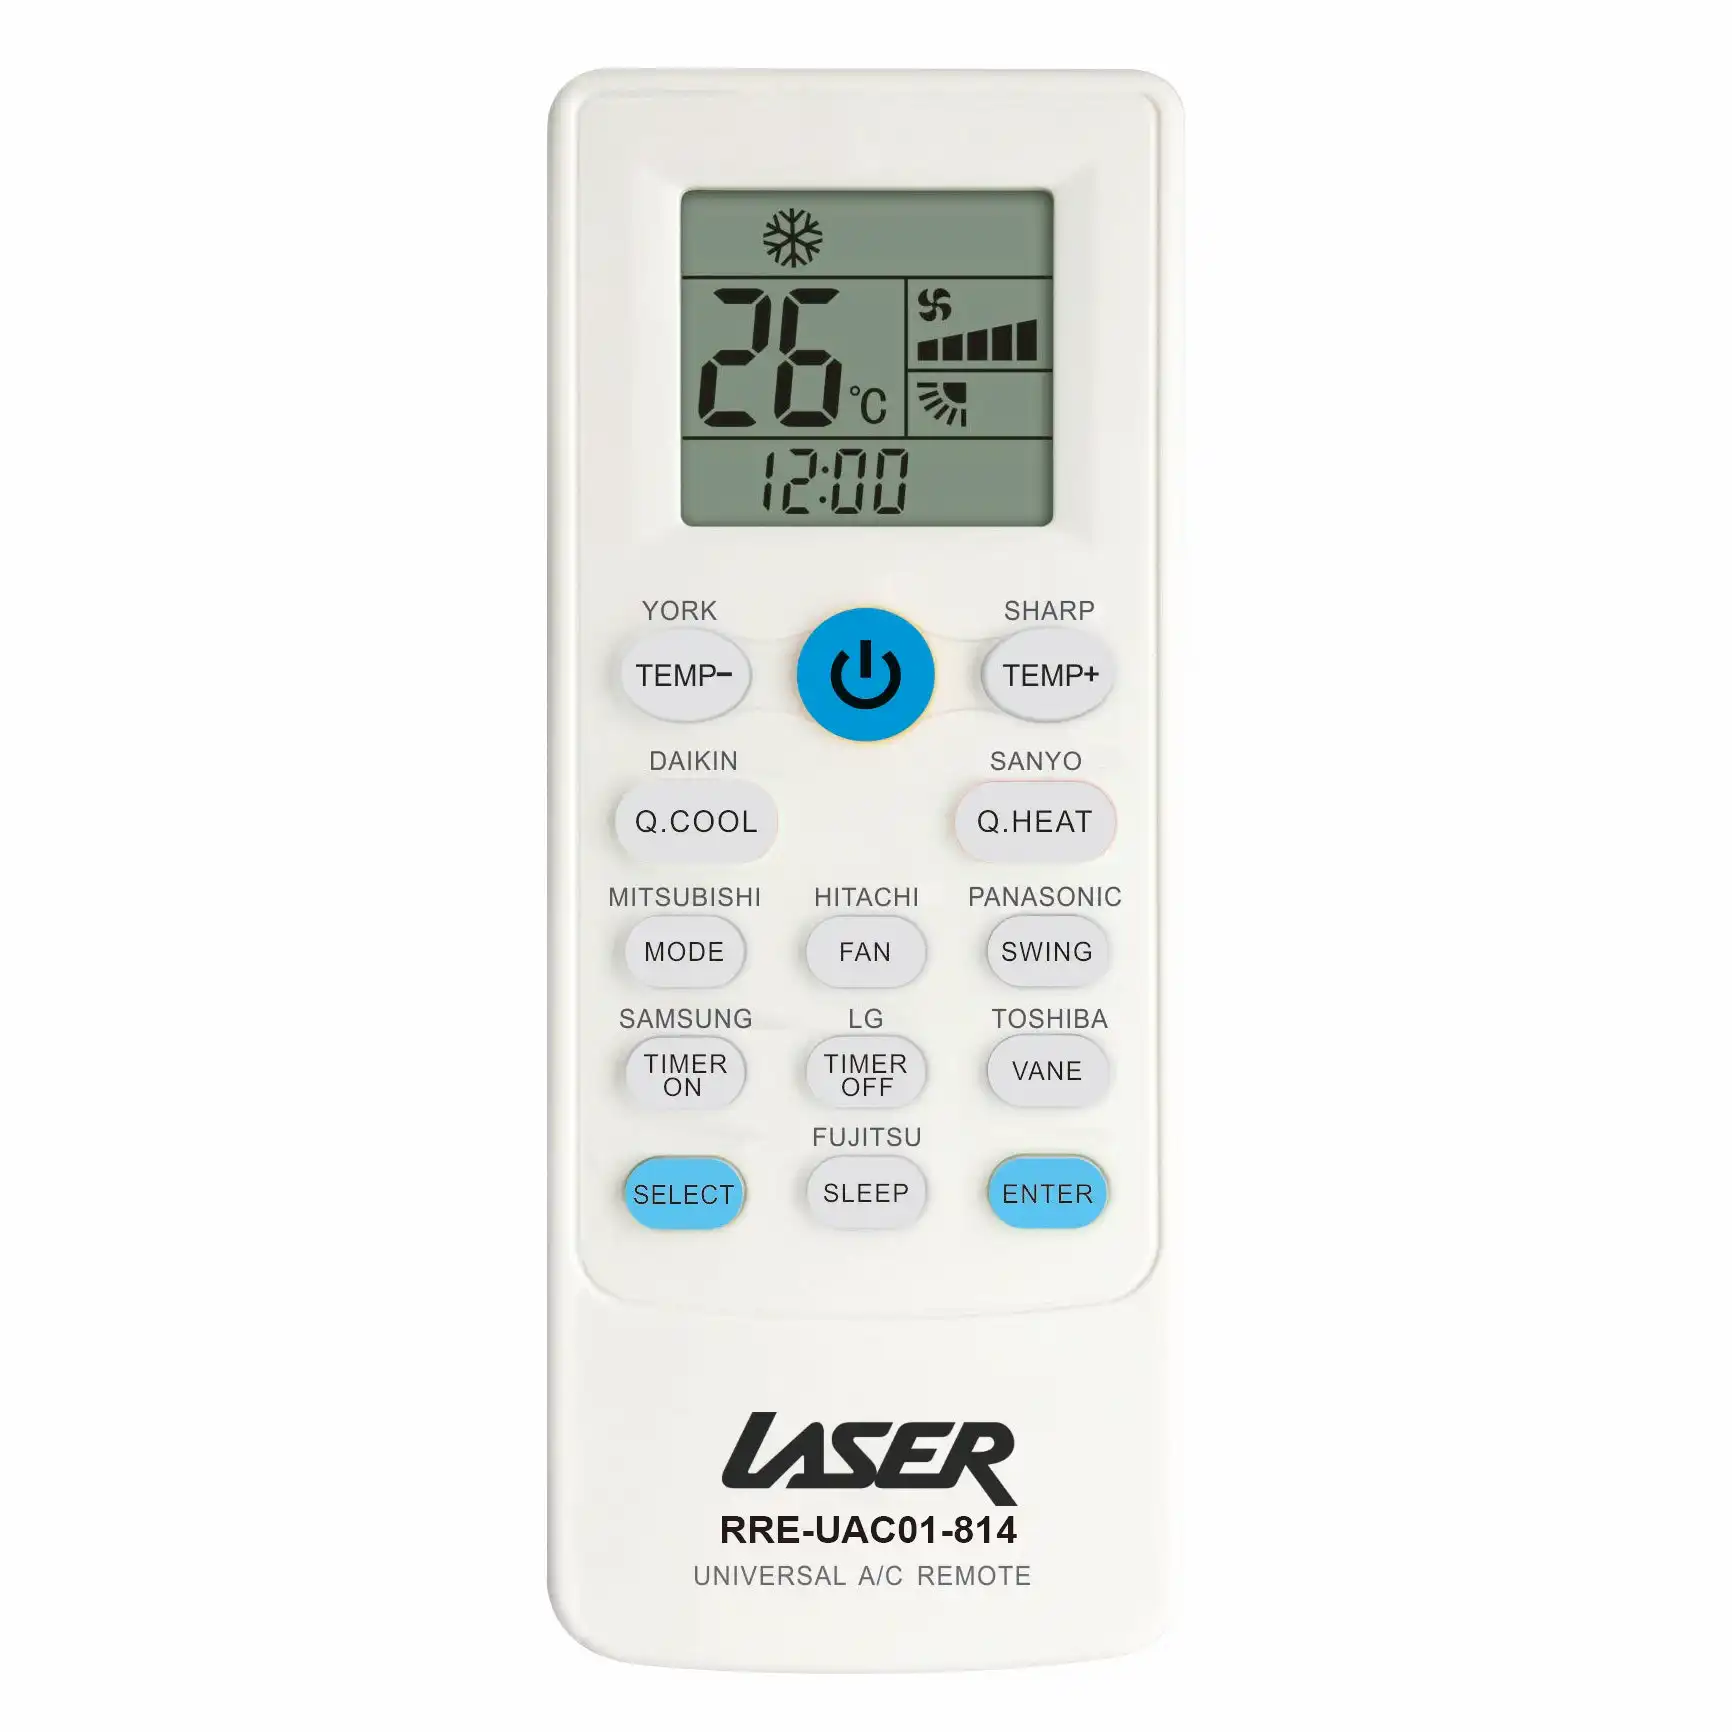 Laser Universal A/C Remote: Quick 2-Button Setup for All Major Brands